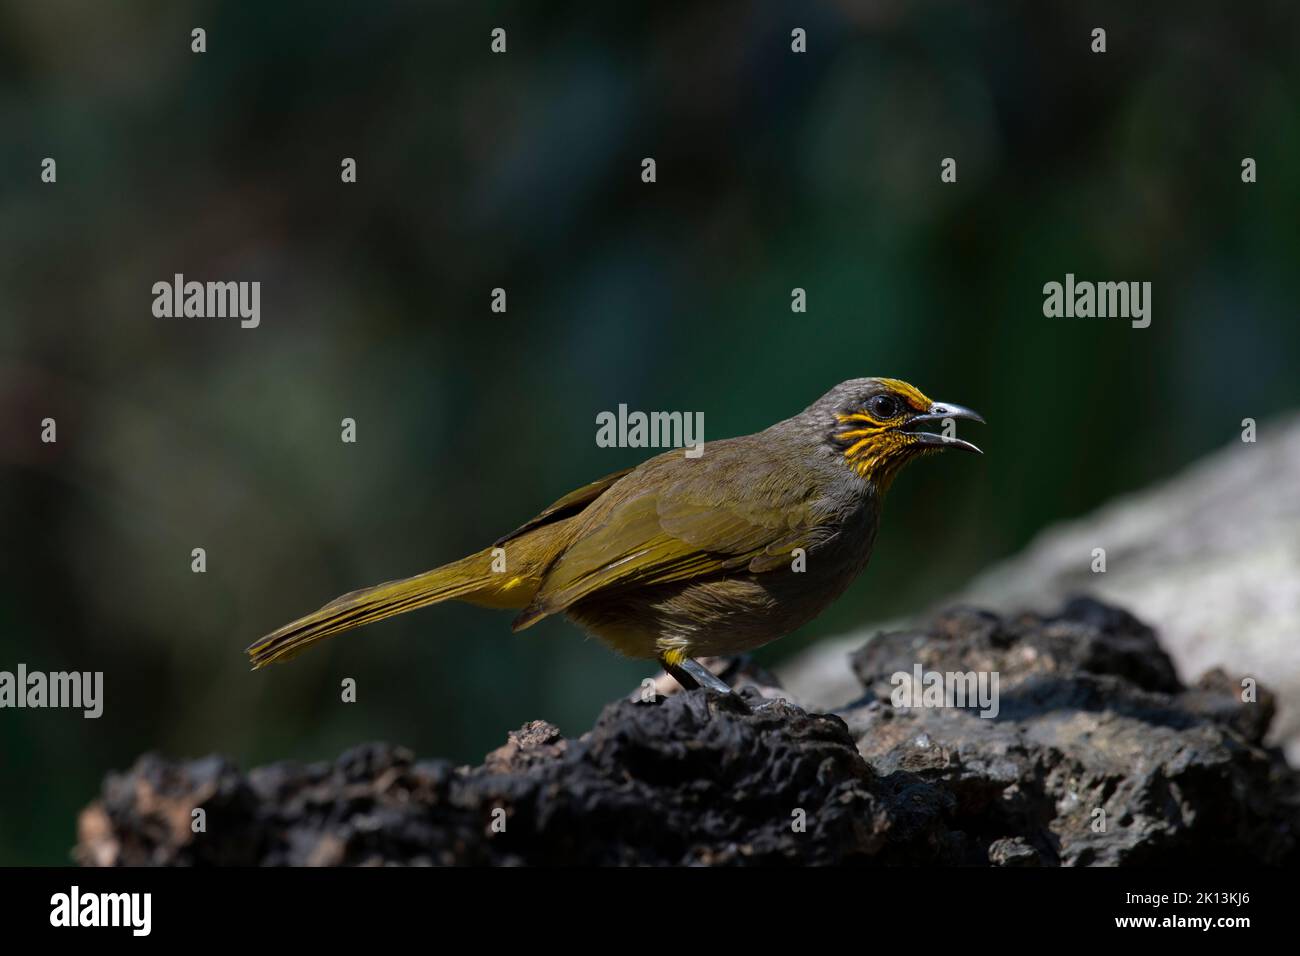 Facing to the right with its beak open after a bath, Stripe-throated Bulbul Pycnonotus finlaysoni, Thailand. Stock Photo